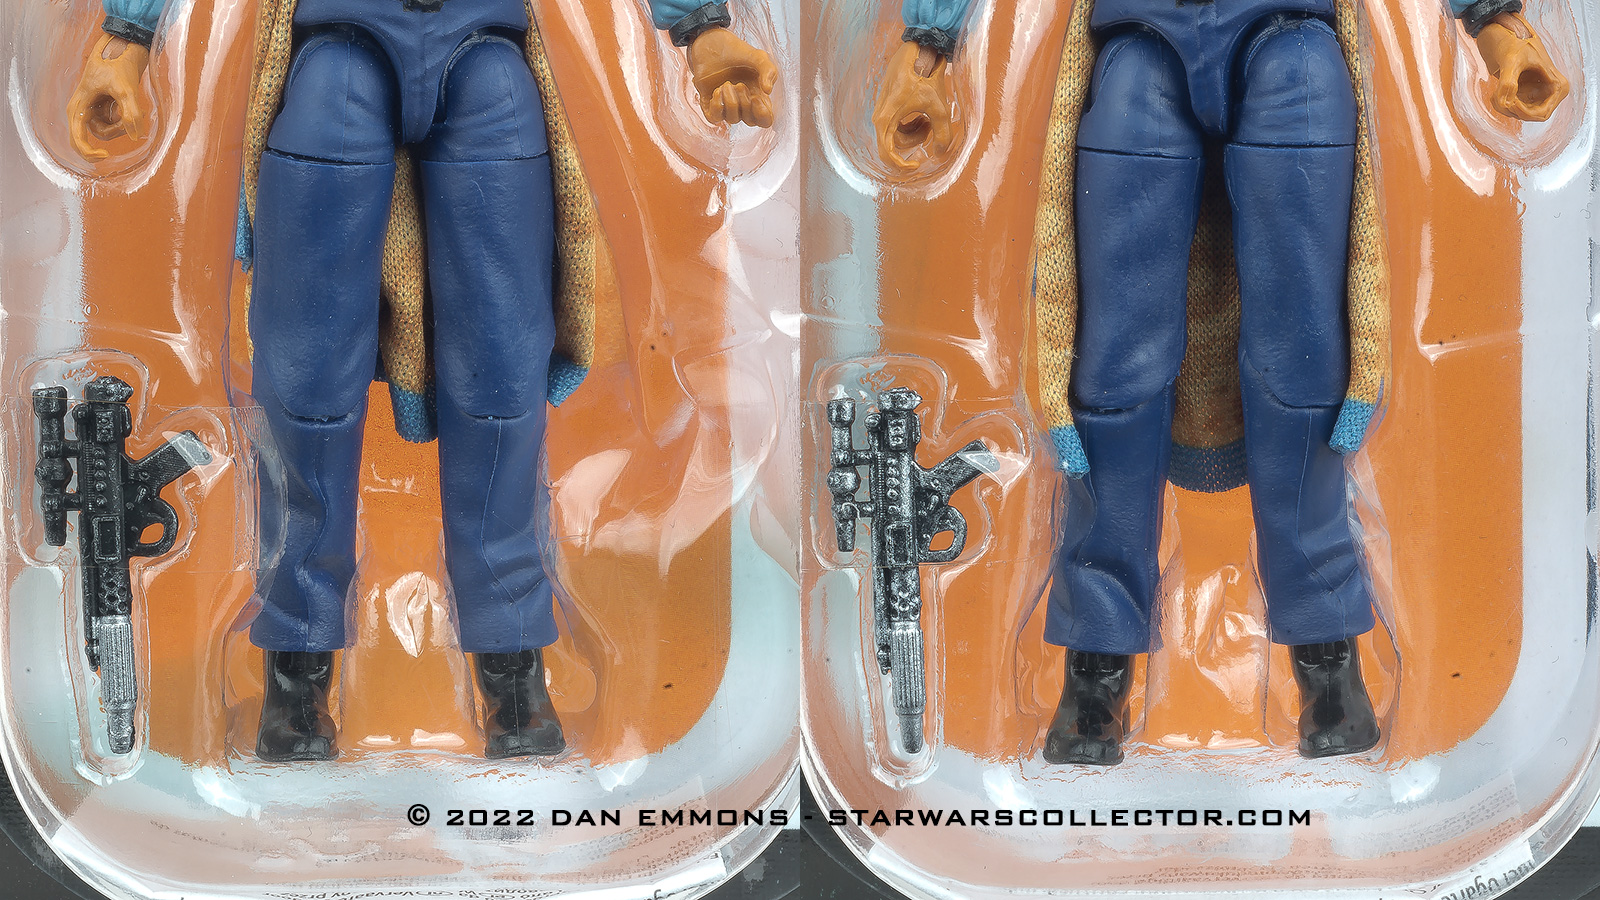 Did Hasbro Update The Gun Paint Deco For The Vintage Collection VC205 Lando Calrissian Figure? Or Just Bad Quality Control?